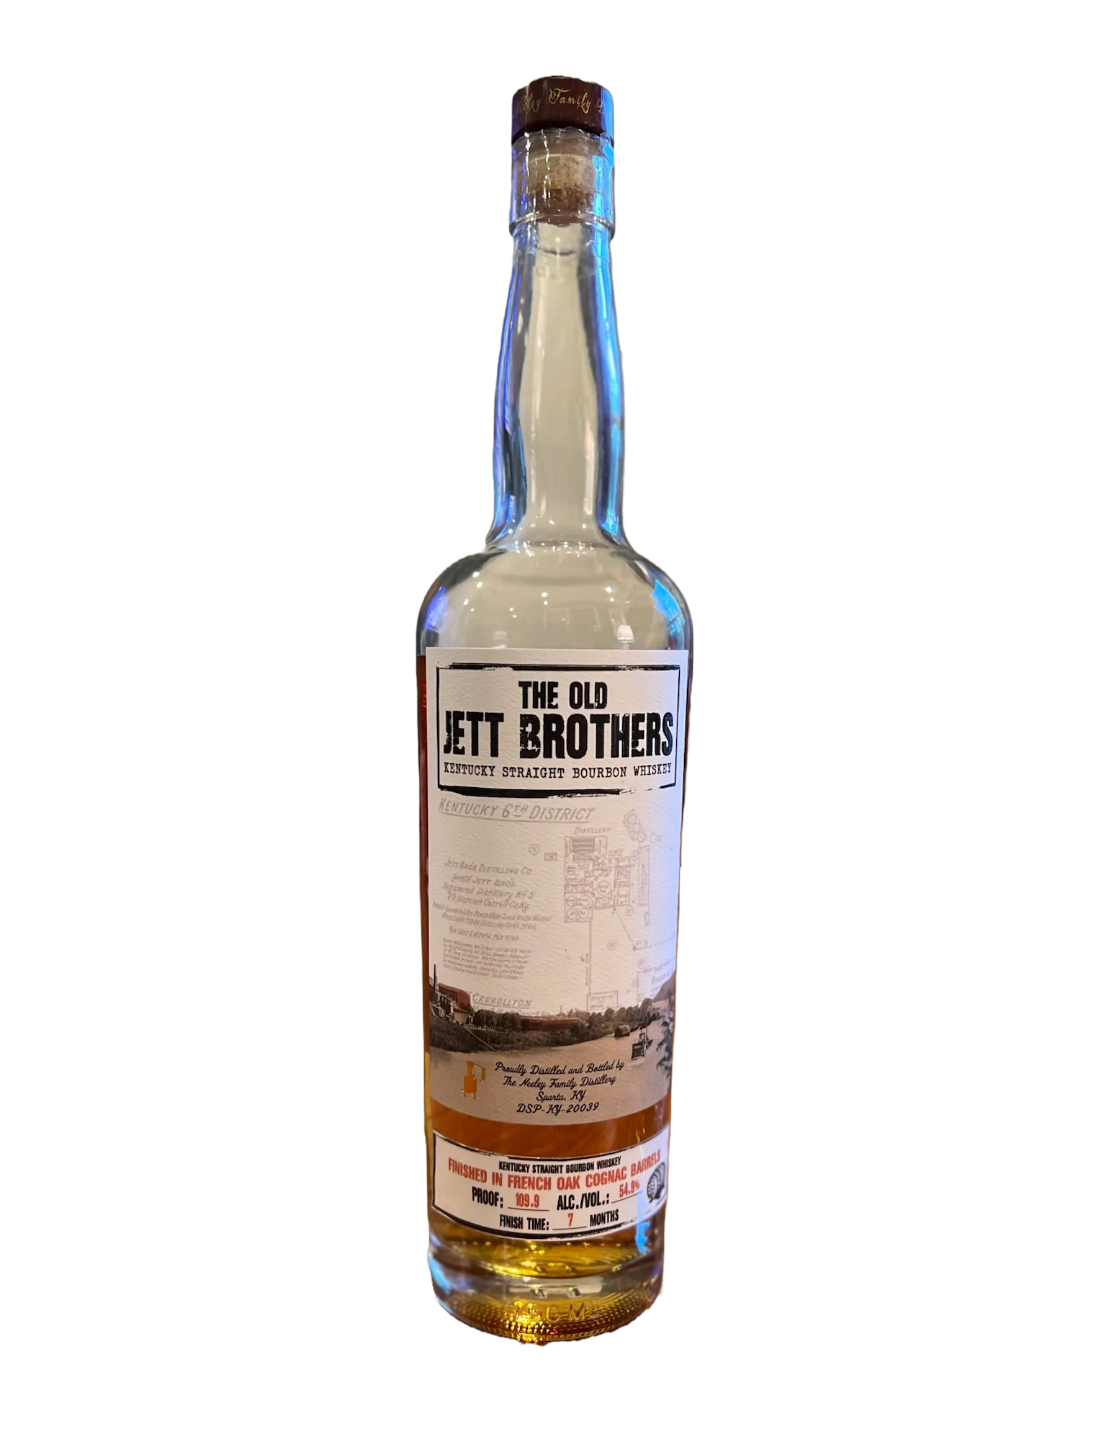 An elegant bottle of Neeley Family Distillery The Old Jett Brothers Sauternes Finished Bourbon in front of a plain white background